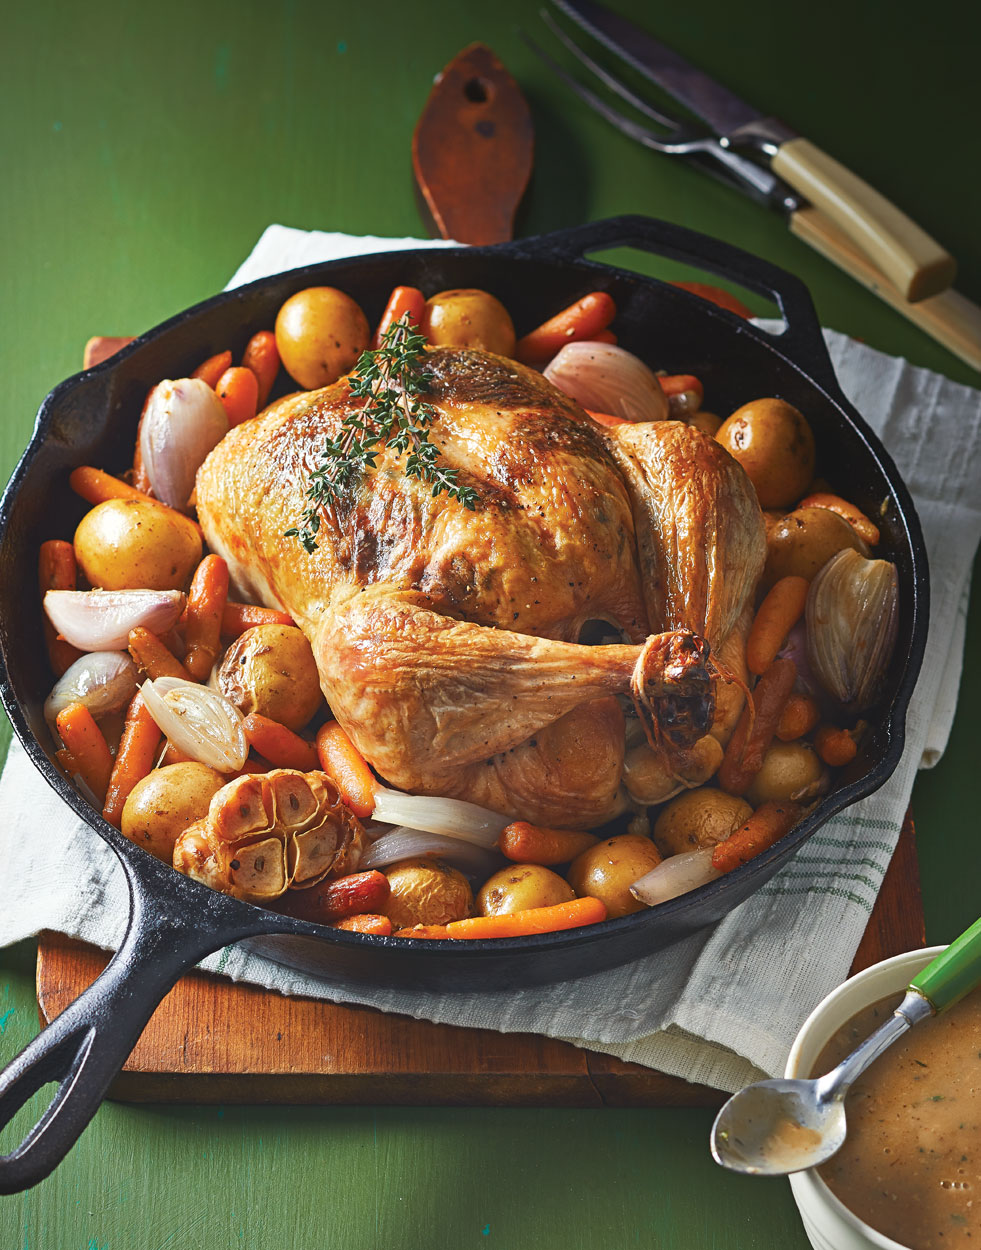 Skillet-Roasted Chicken with Lemon-Thyme Sauce